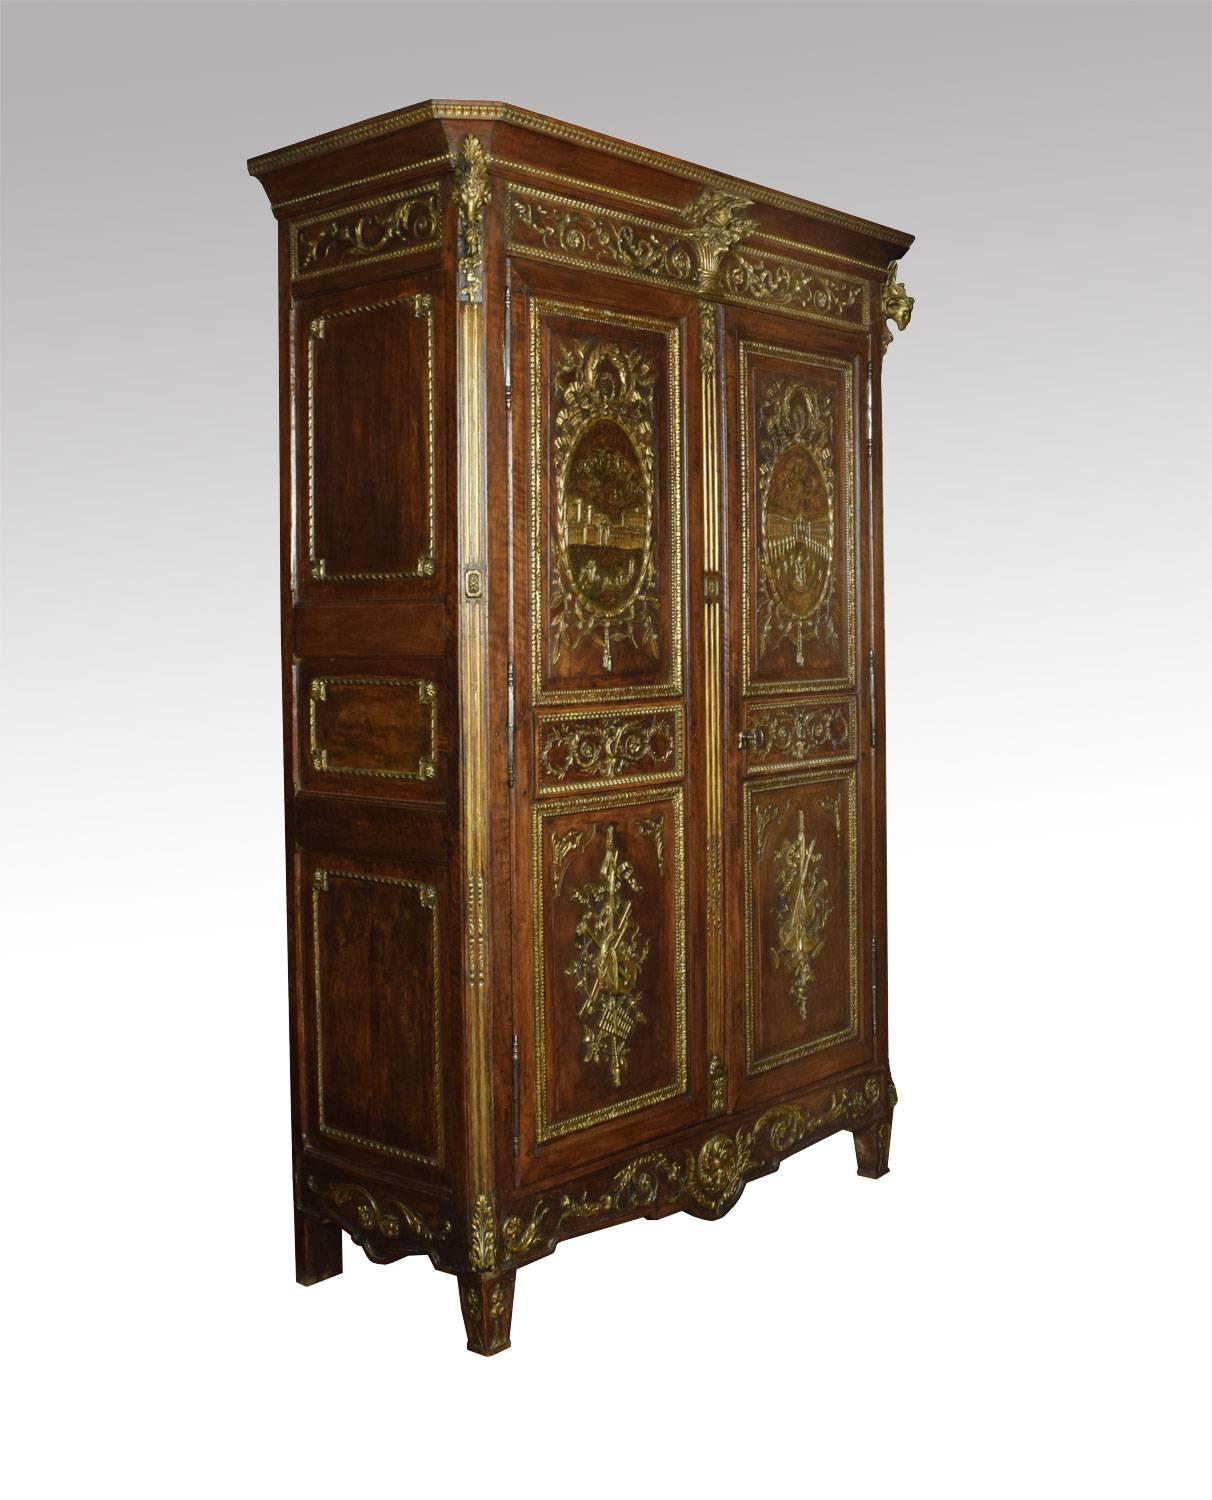 Louis XV French walnut armoire, the projecting cornice surmounted with carved ram’s heads, above two large paneled doors with detailed gilded scenes incorporating baskets of flowers and trailing festoons, with architectural vistas and musical